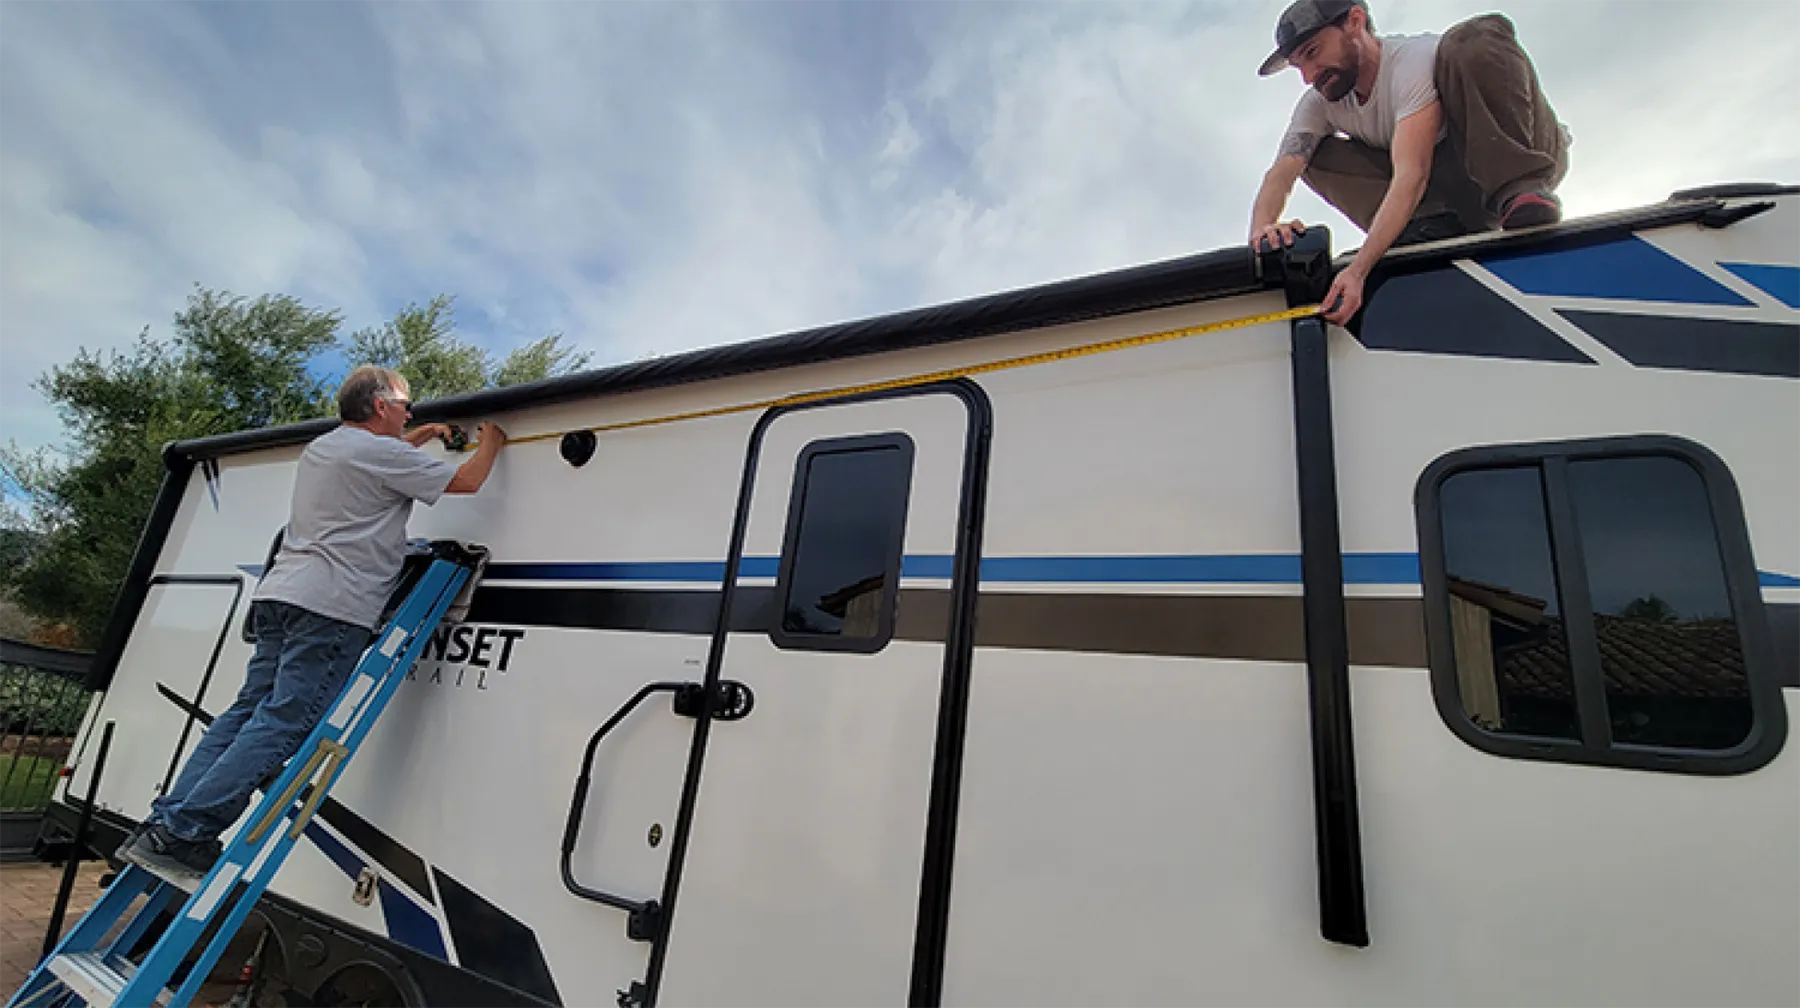 here the awning spans almost the entire length of the trailer, making the cradle assembly necessary to prevent sagging